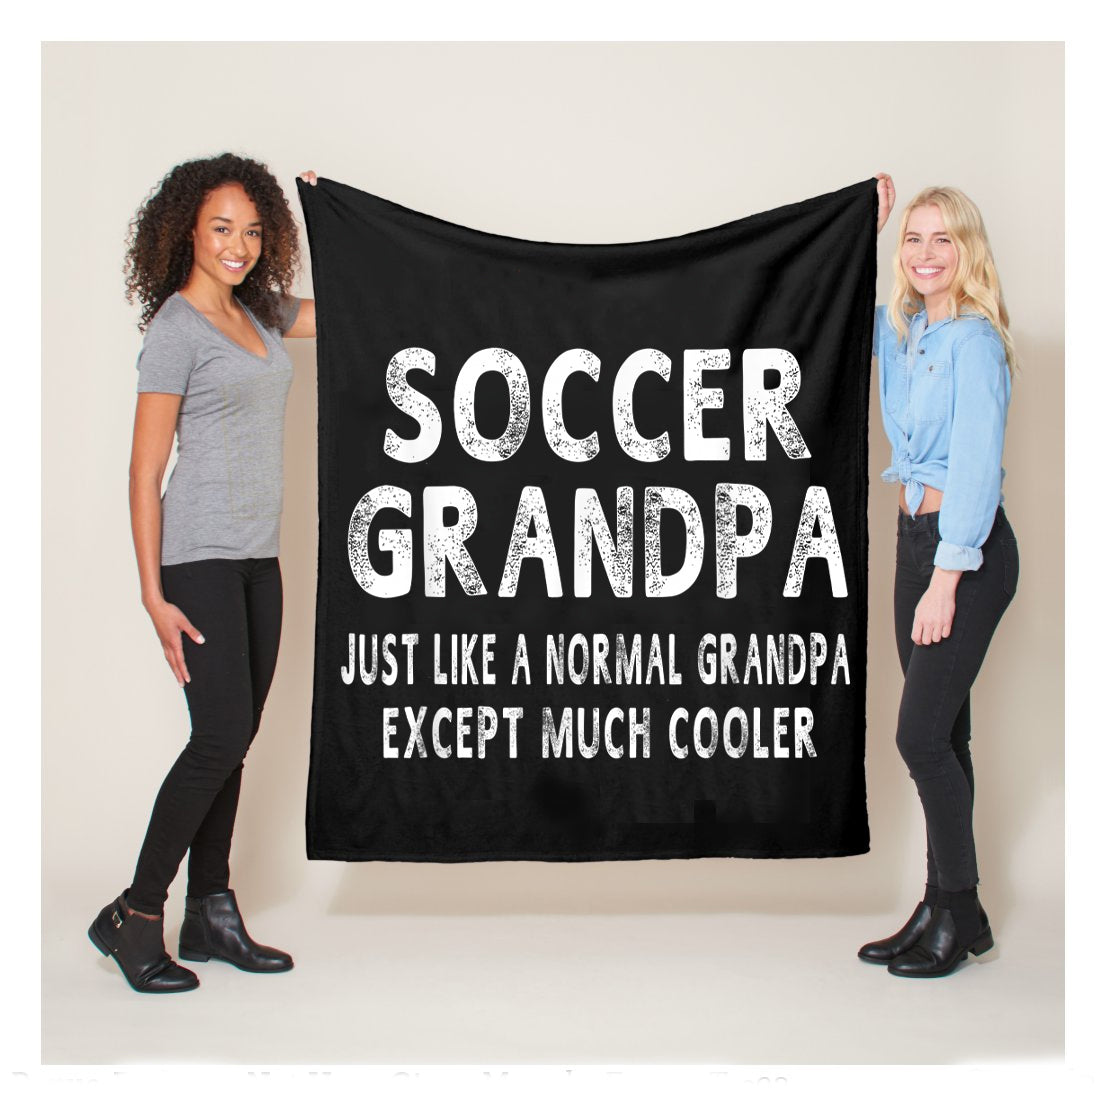 Im A Soccer Grandpa Just Like A Normal Except Much Cooler Fleece Blanket,  Soccer Blankets, Soccer Gifts, Happy Fathers Day Gift Ideas For Grandpa